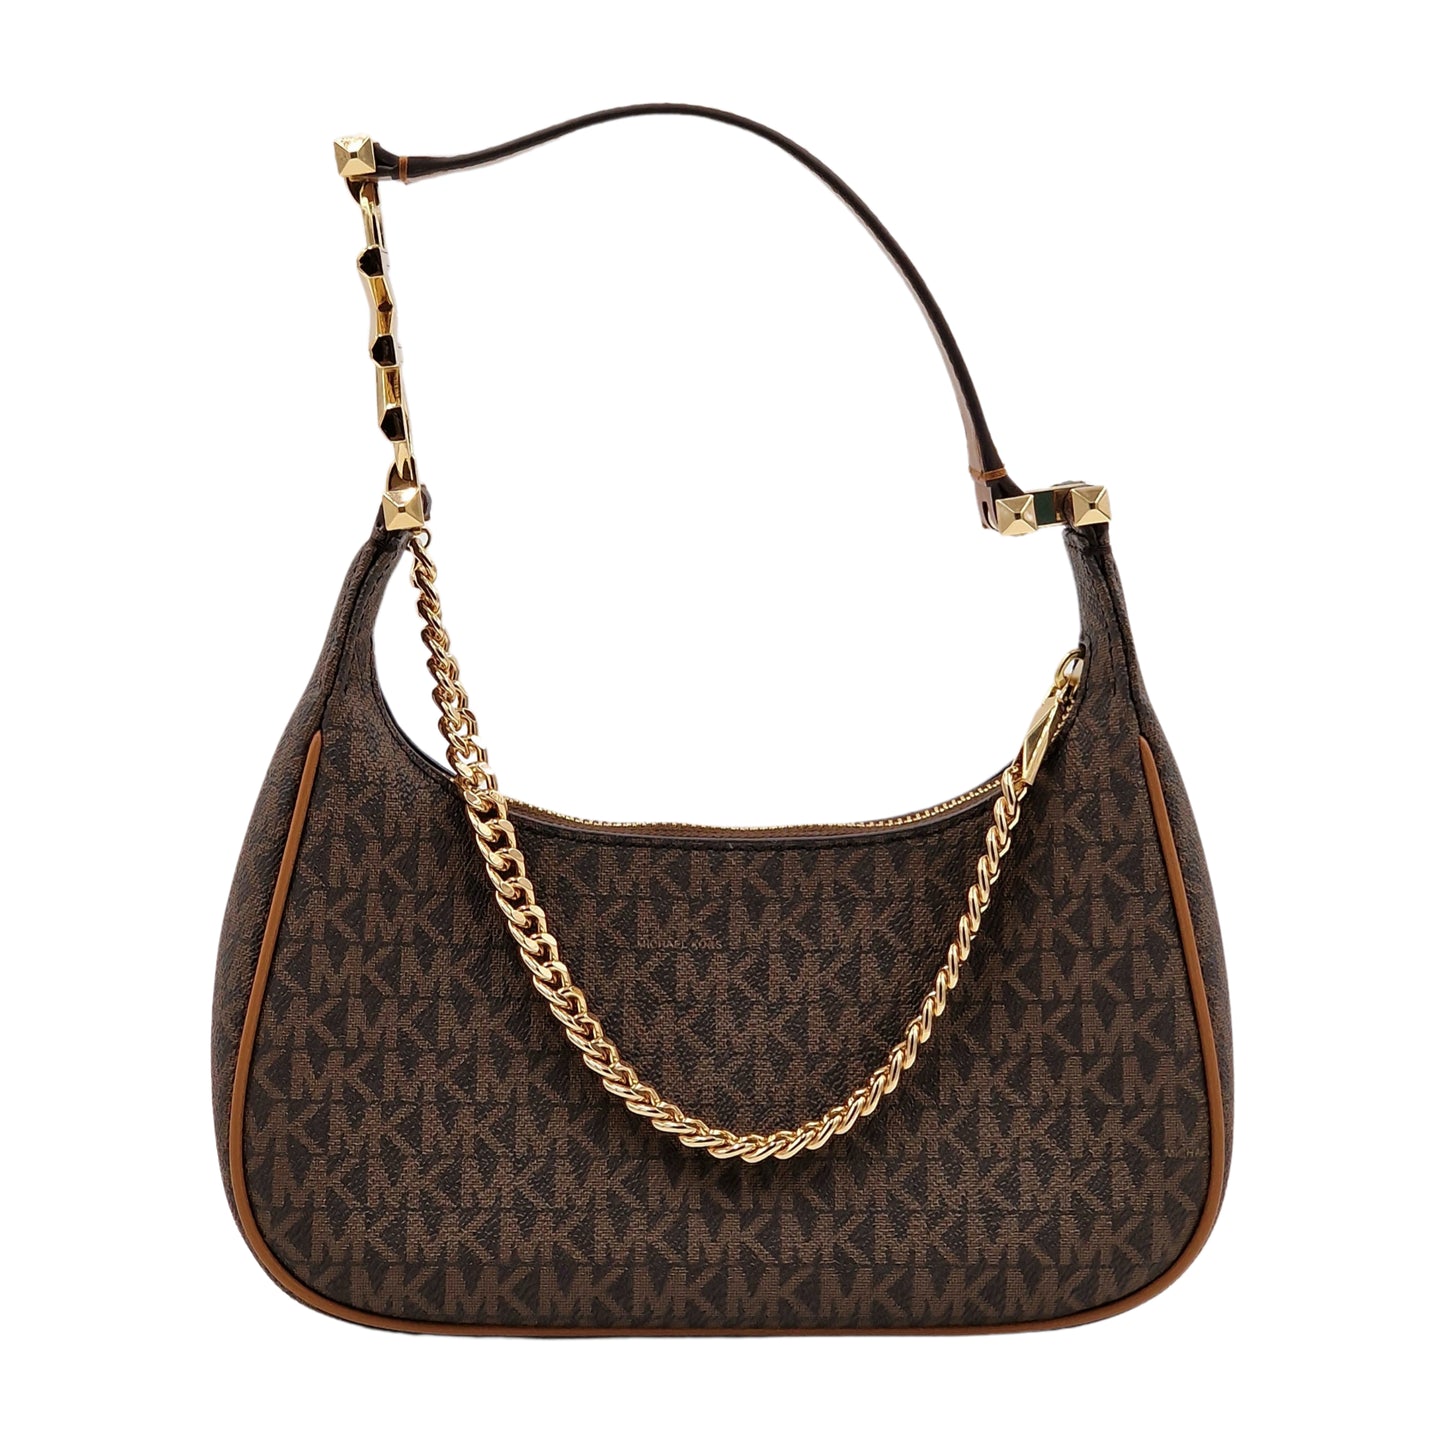 Michael Kors Piper Small Studded Suede Shoulder Bag - Brown